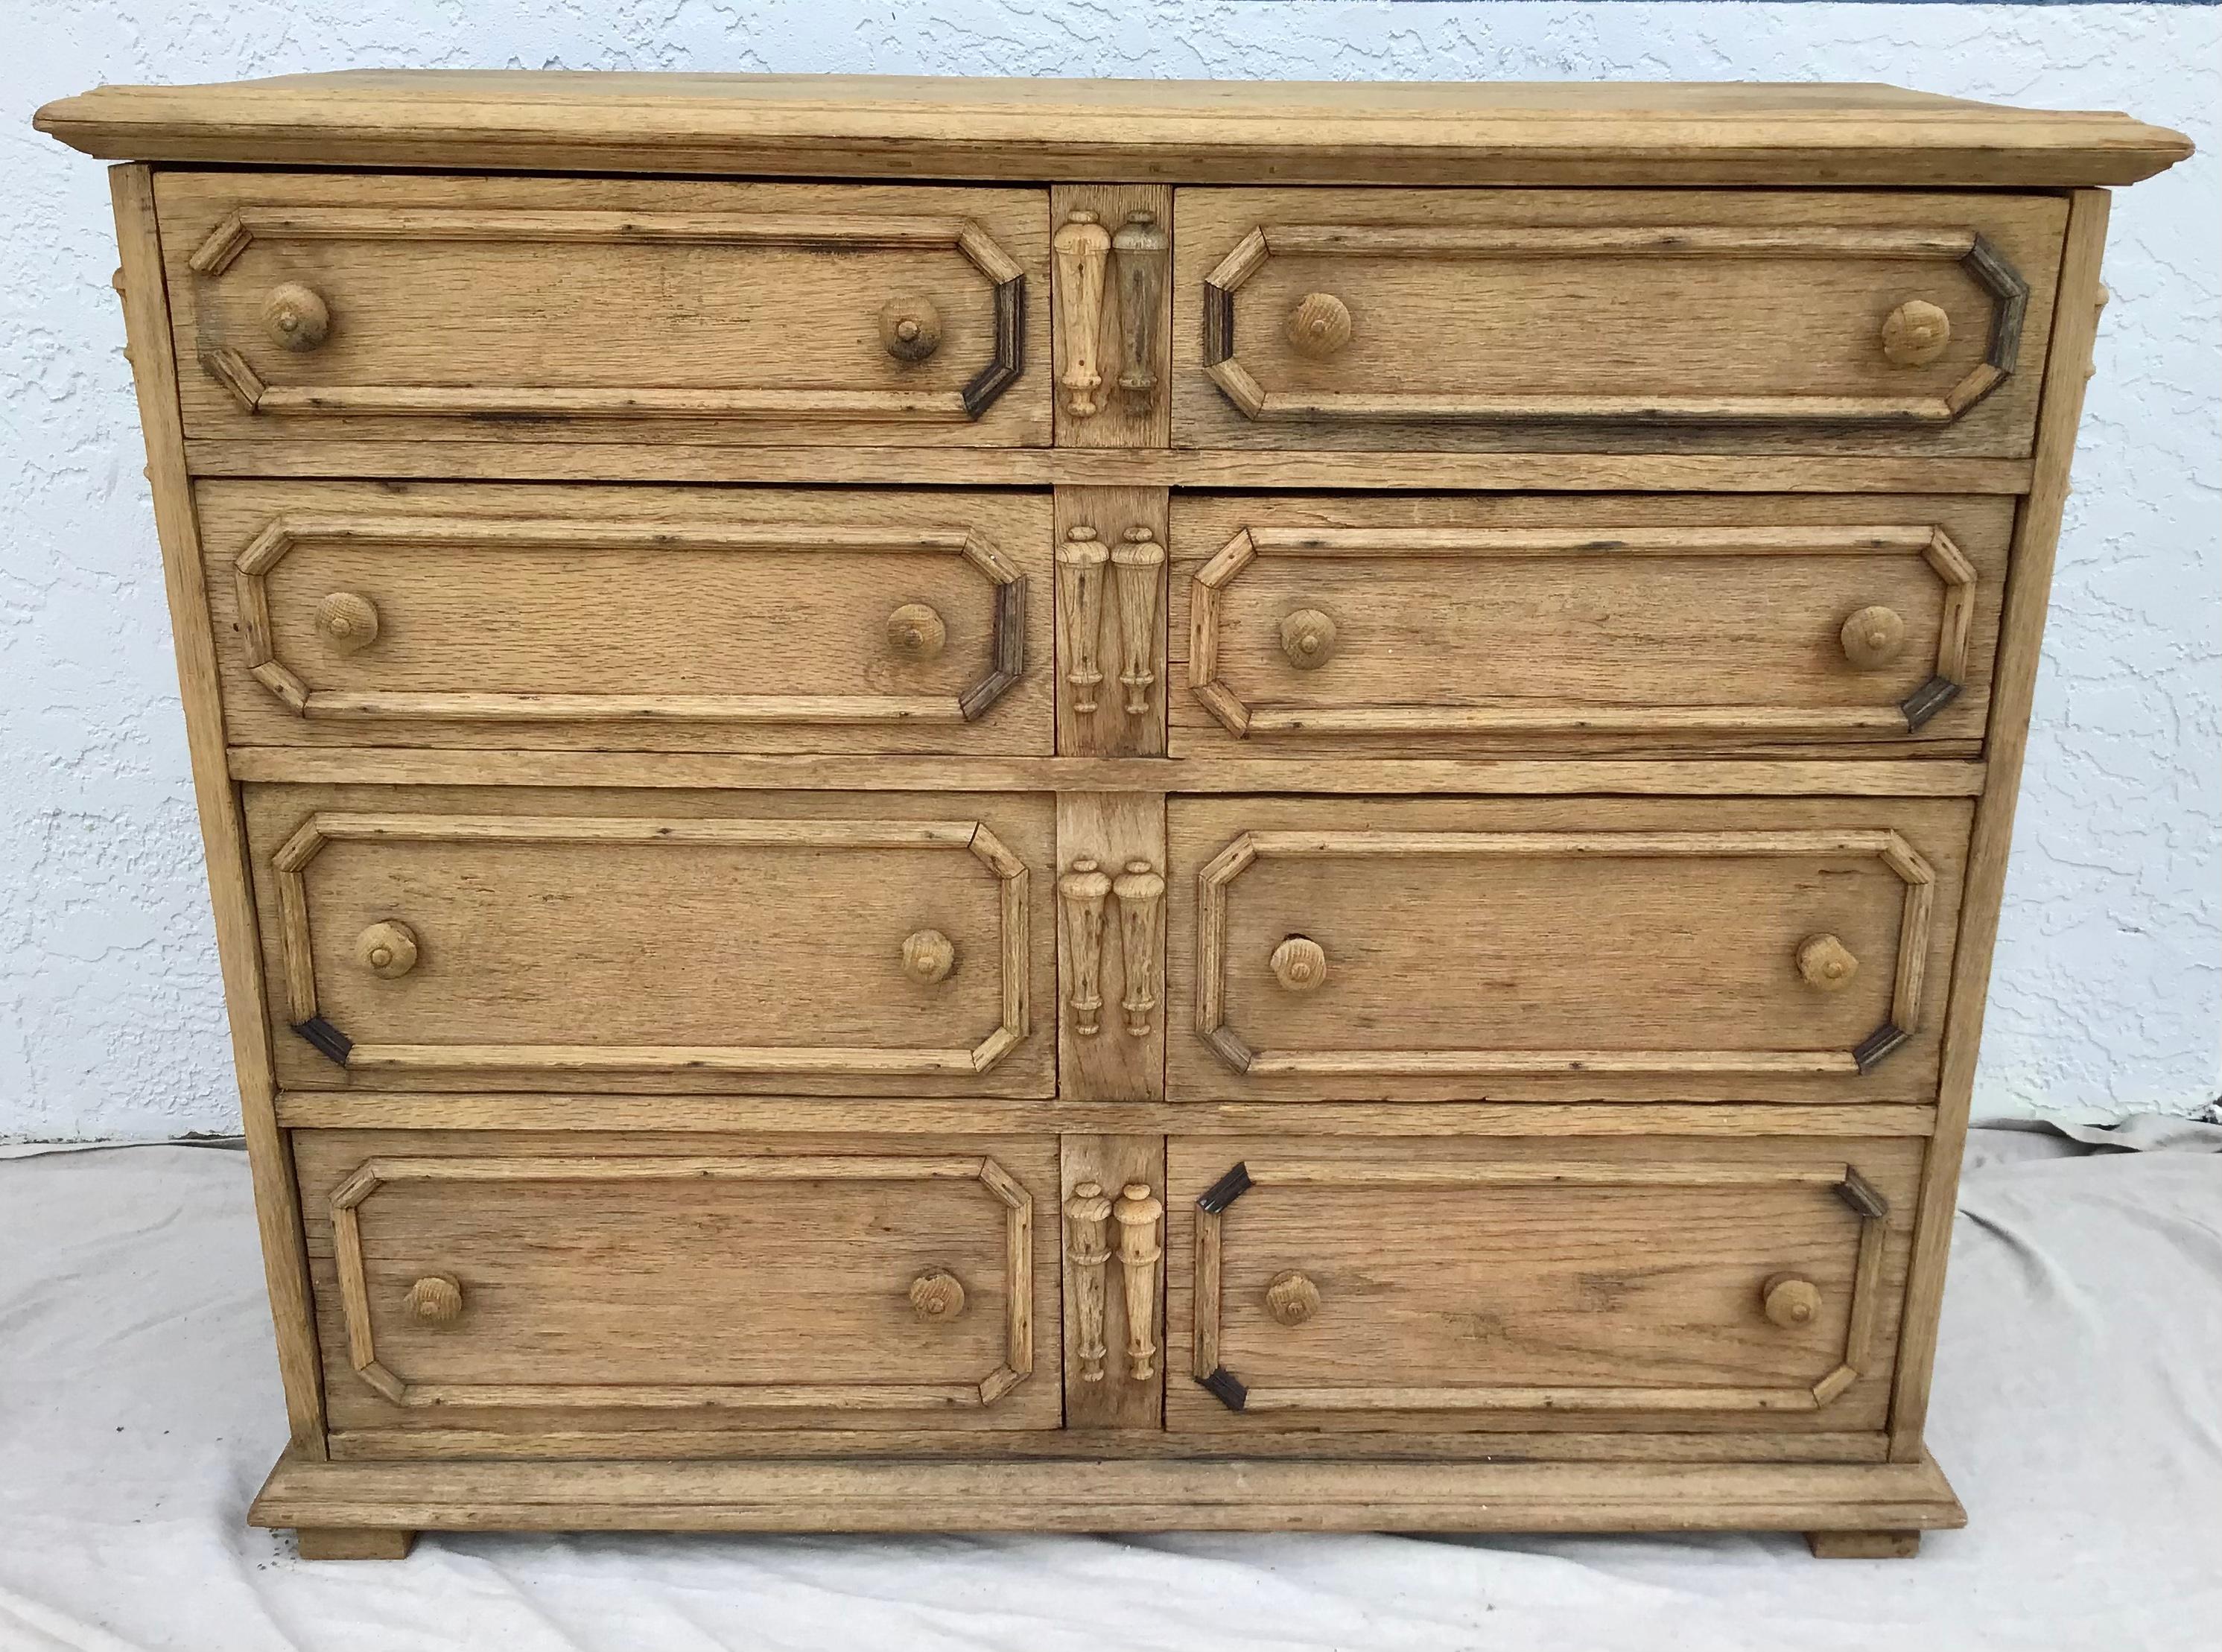 This is a beautiful English Jacobean style chest constructed using oak and pegged construction during the late 19th century with two rows of drawers. 8 total drawers. In a wonderful, bleached finish.